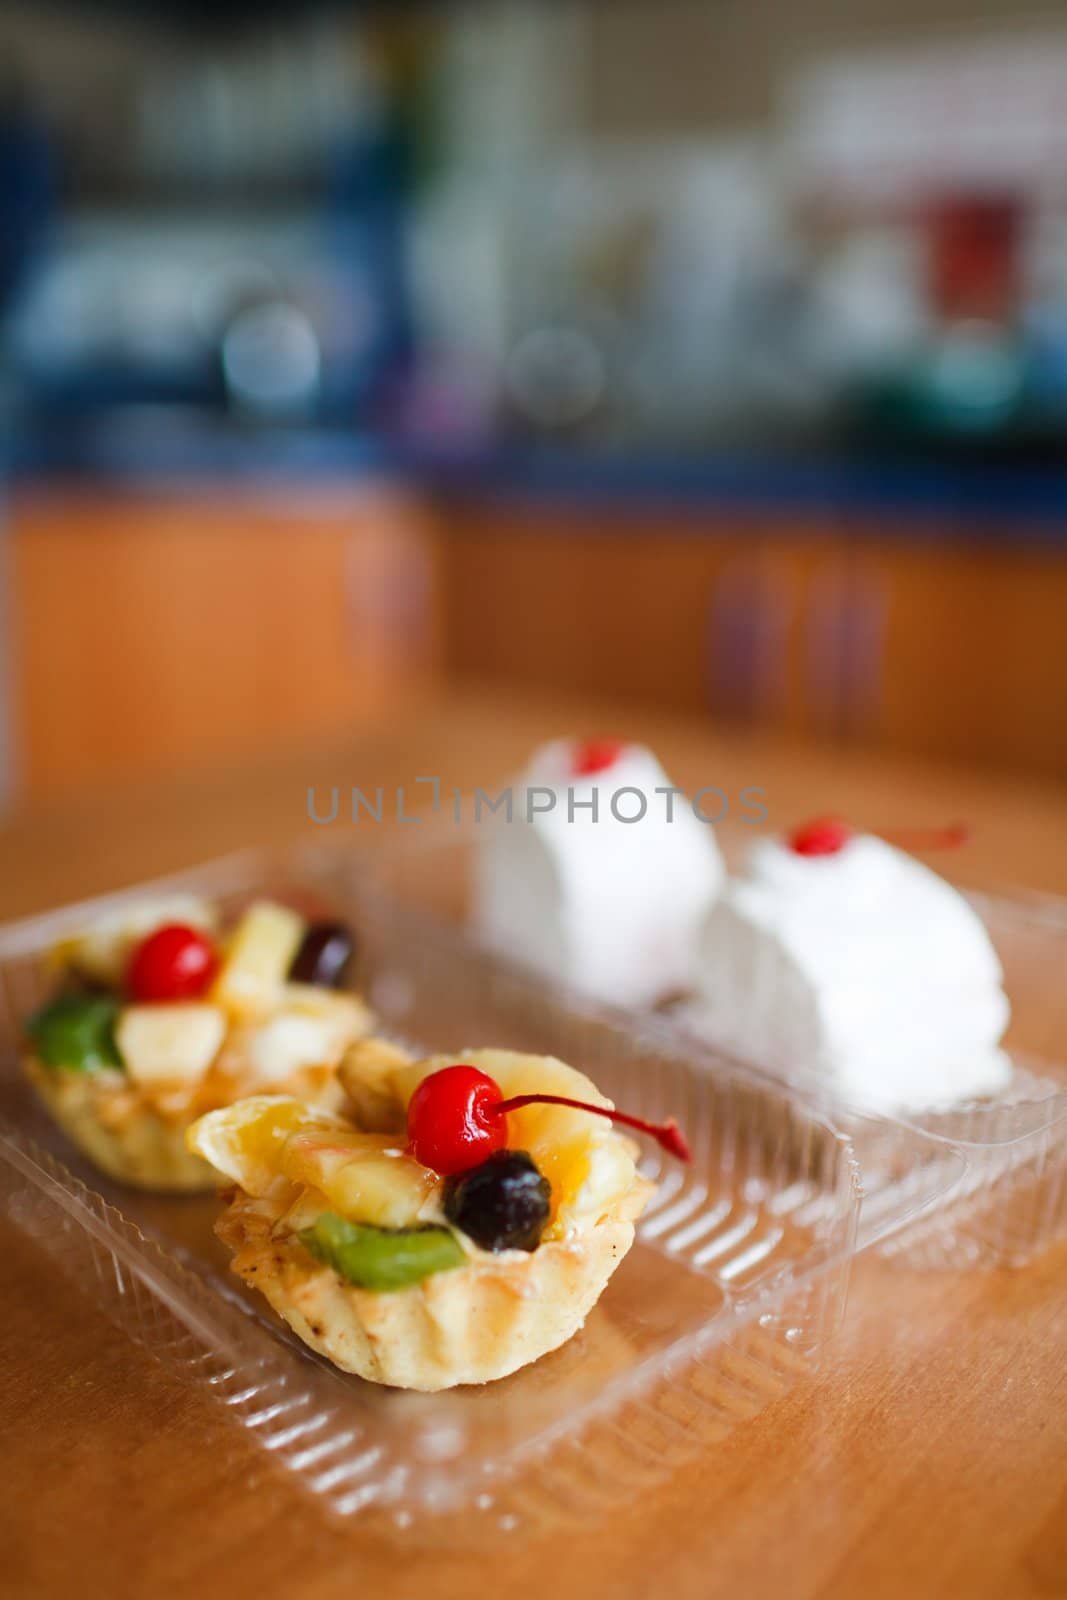 Cupcakes with cherry on top on wooden table. Selective focus. Make with Canon 35 1.4
aperture 1.4 was used for small DOF